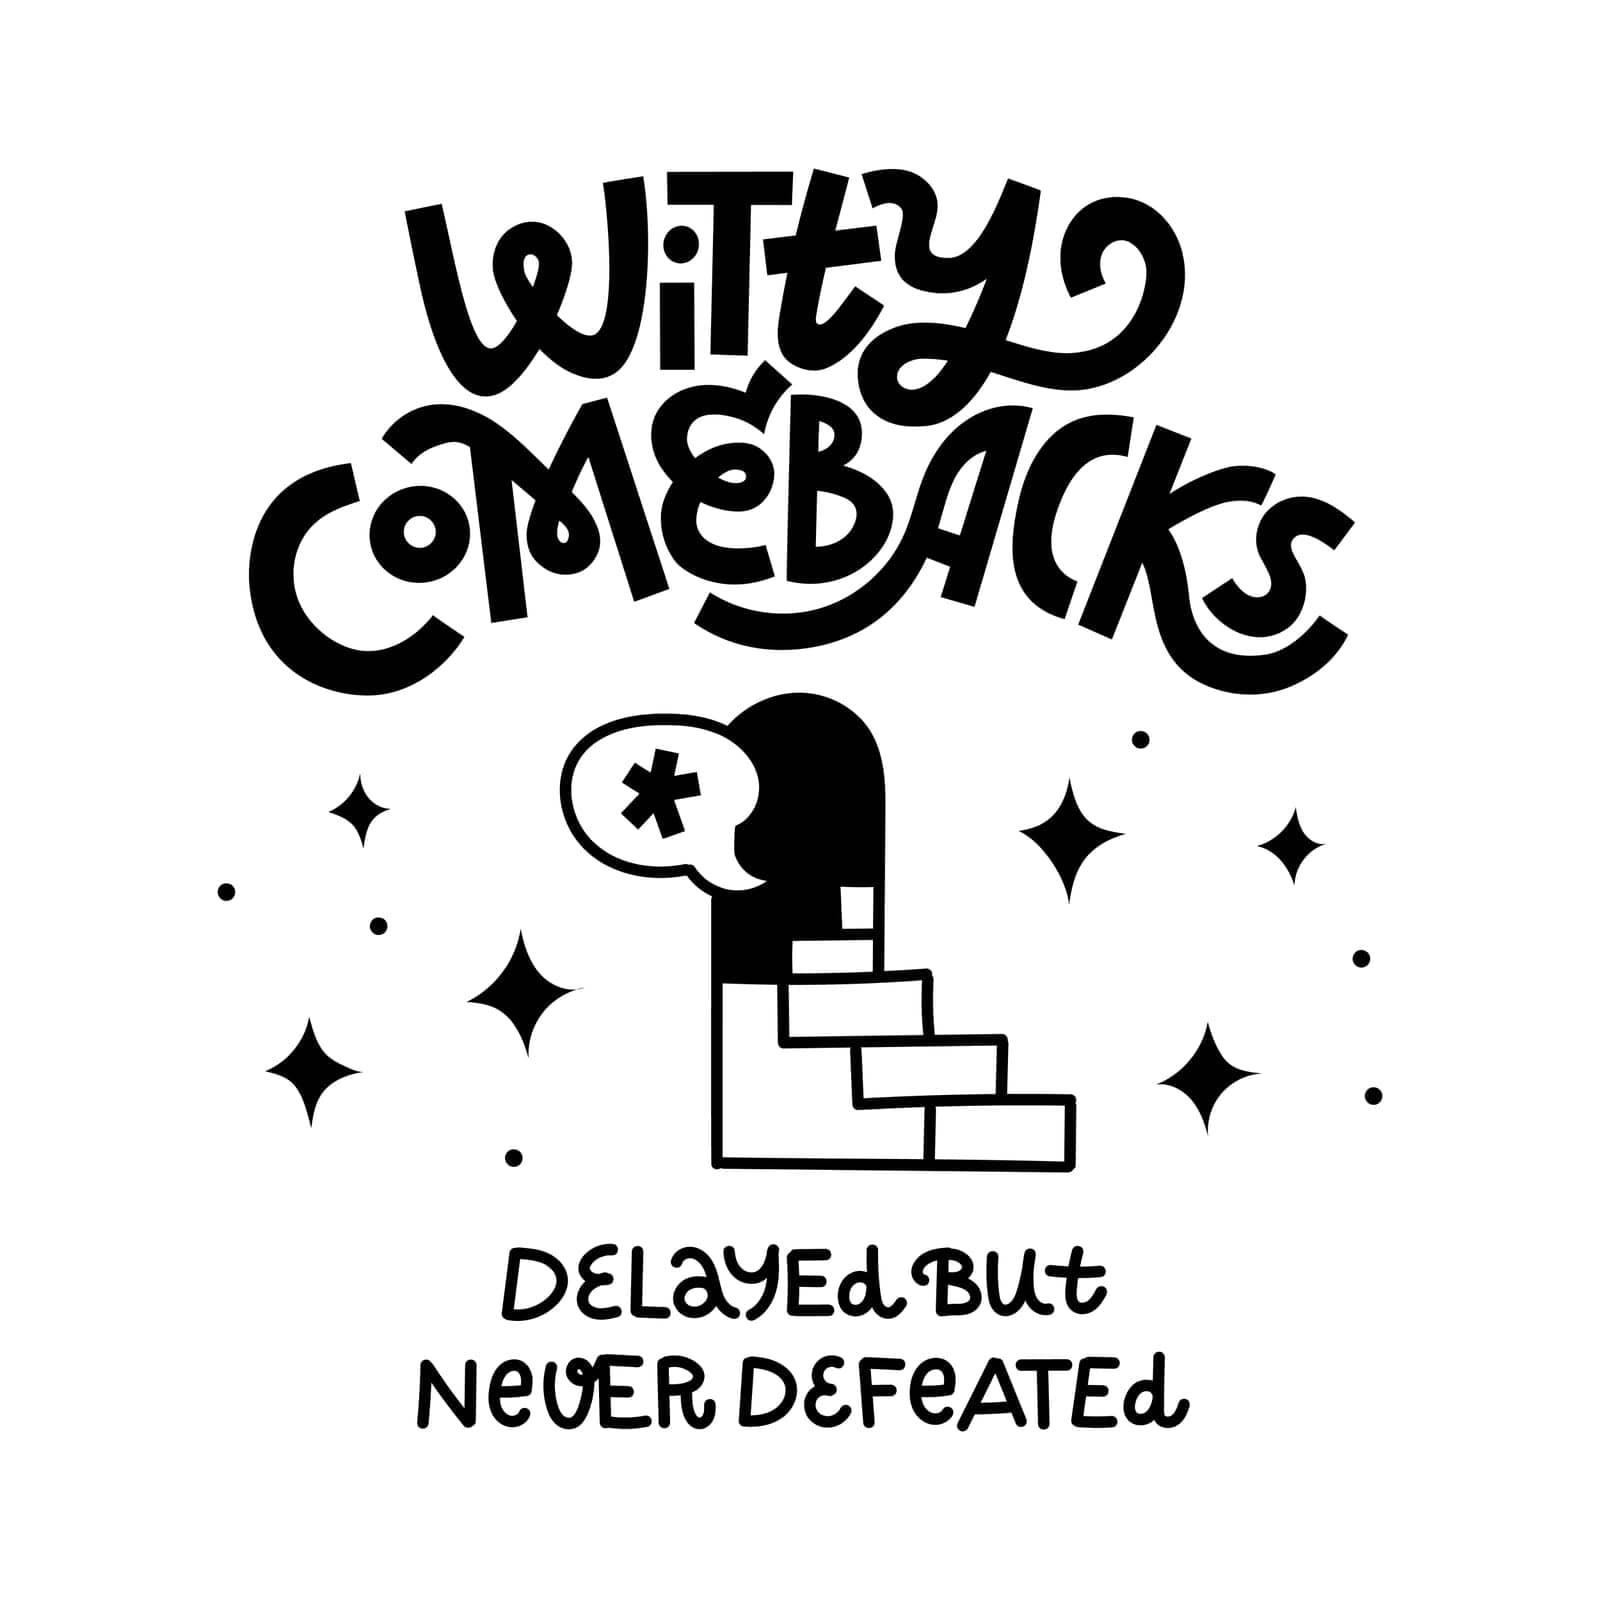 Witty Comebacks - Delayed But Never Defeated. Funny T shirt print about comedy and jokes you come up with too late. Hand-drawn lettering and black and white doodles.